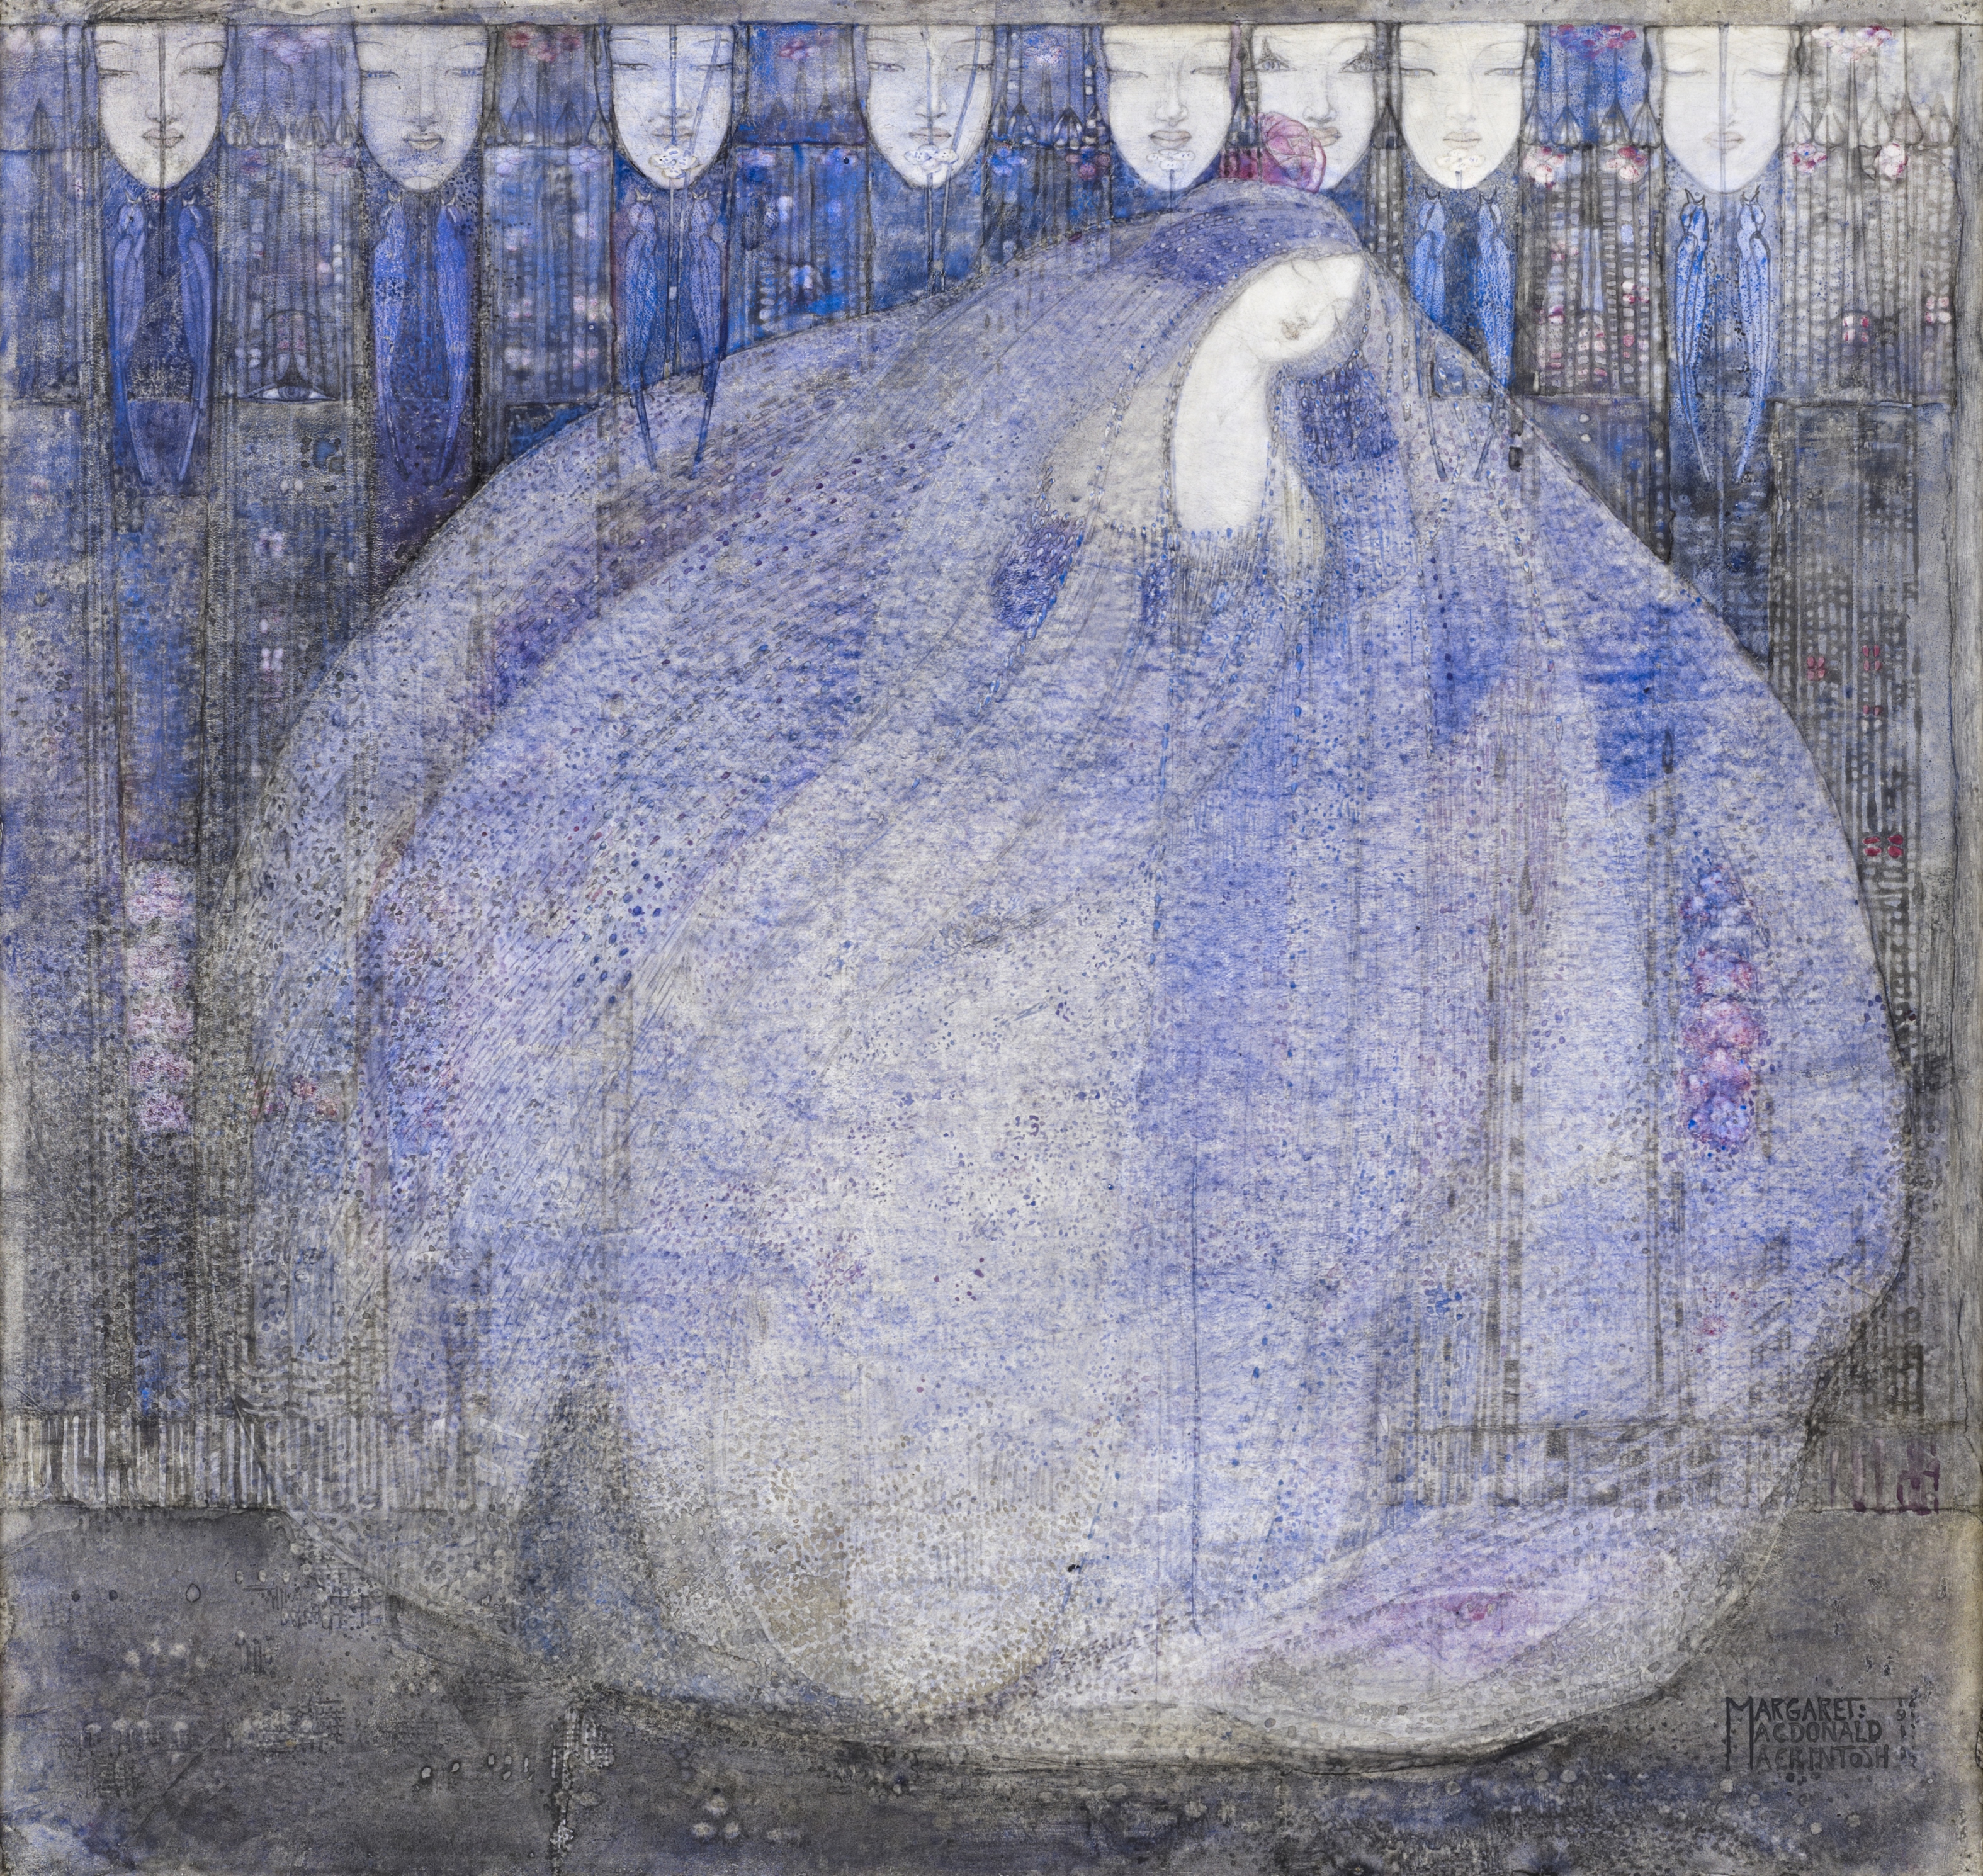 The Mysterious Garden by Margaret Macdonald Mackintosh - 1911 - 45.1 x 47.7 cm National Galleries of Scotland